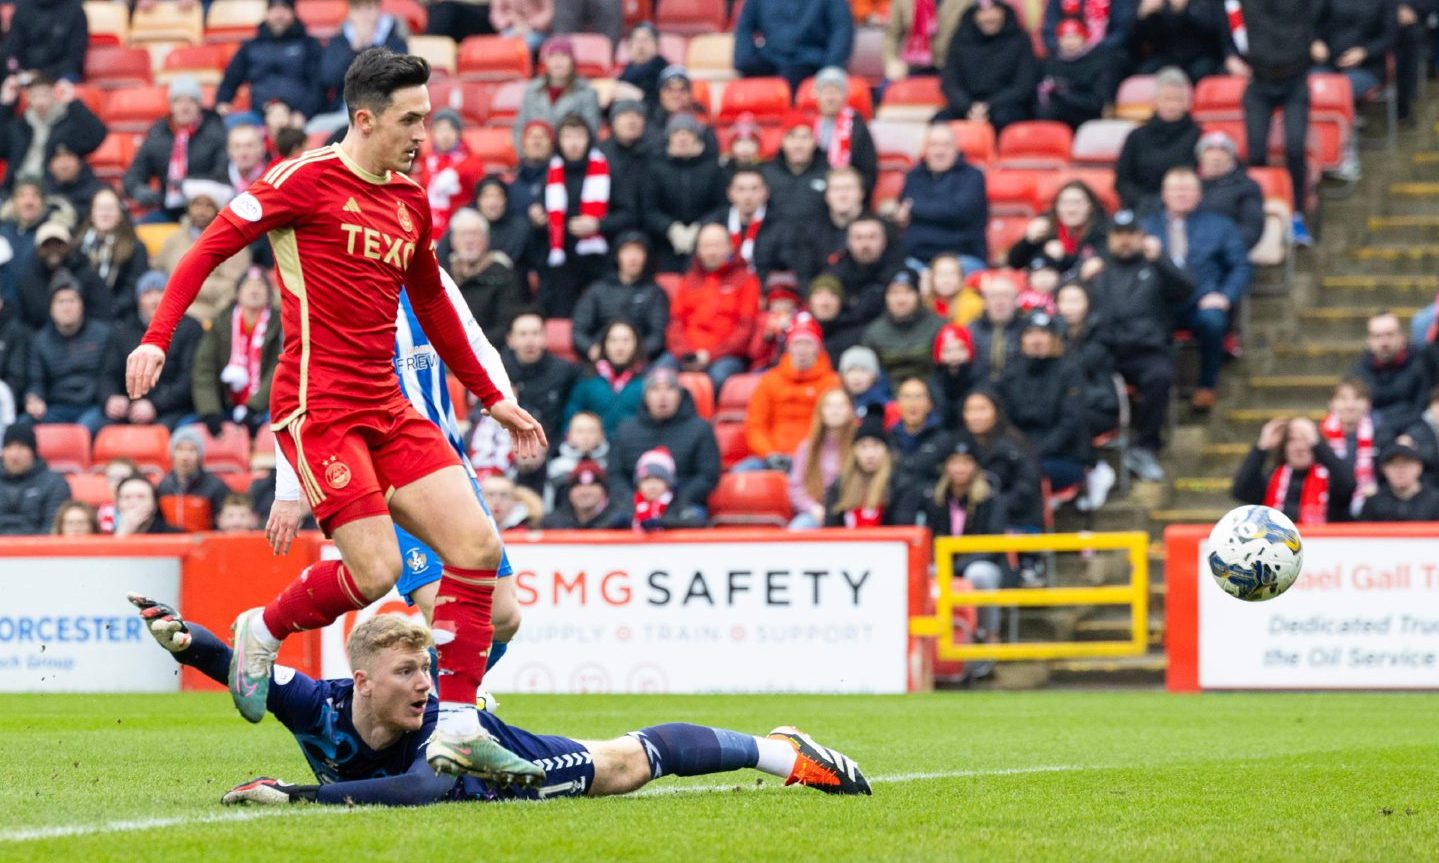 Aberdeen's Jamie McGrath scores to make it 1-0 against Kilmarnock in the Scottish Cup quarter-final at Pittodrie.